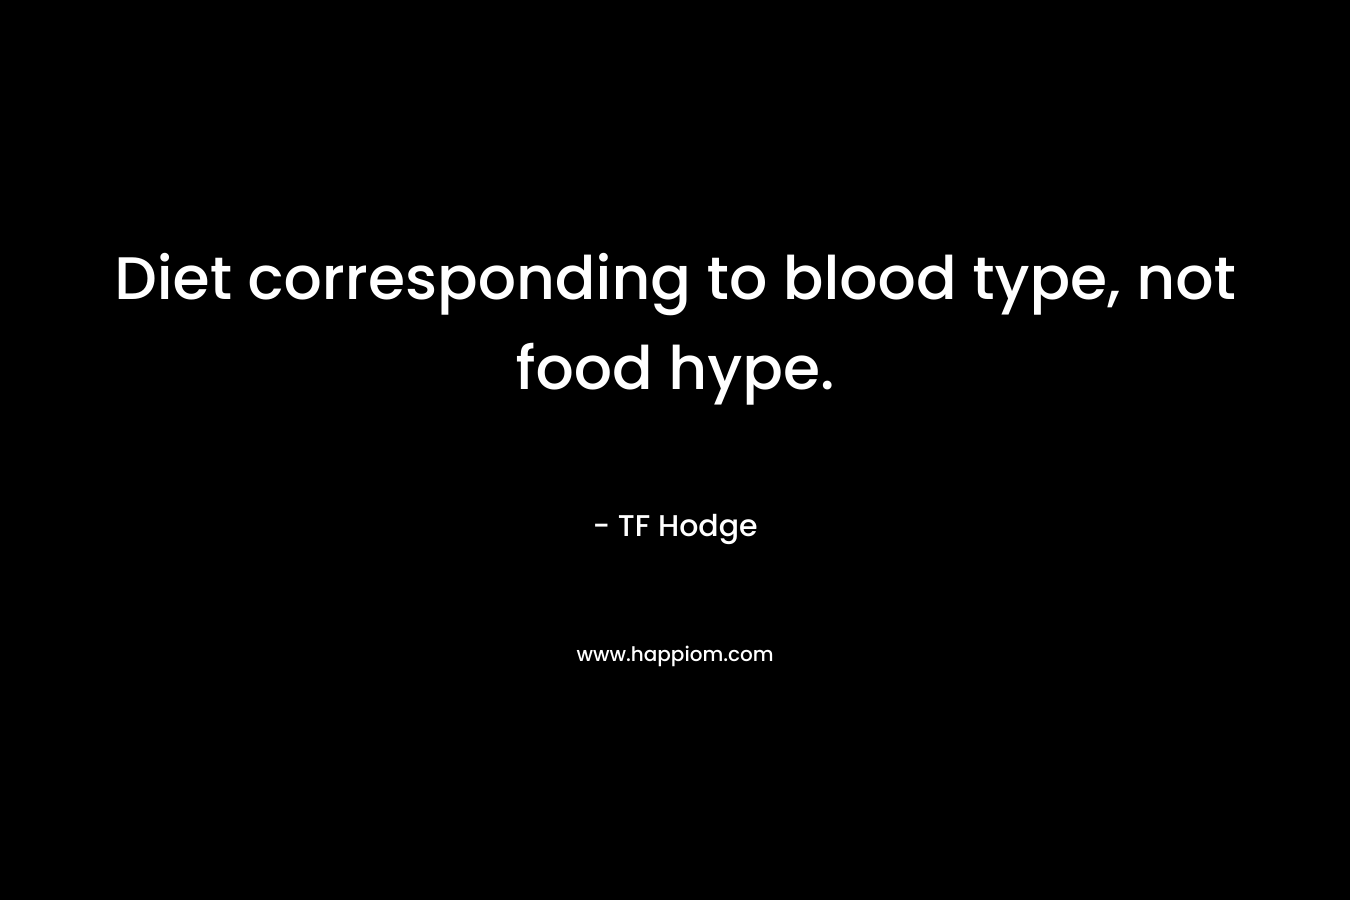 Diet corresponding to blood type, not food hype. – TF Hodge